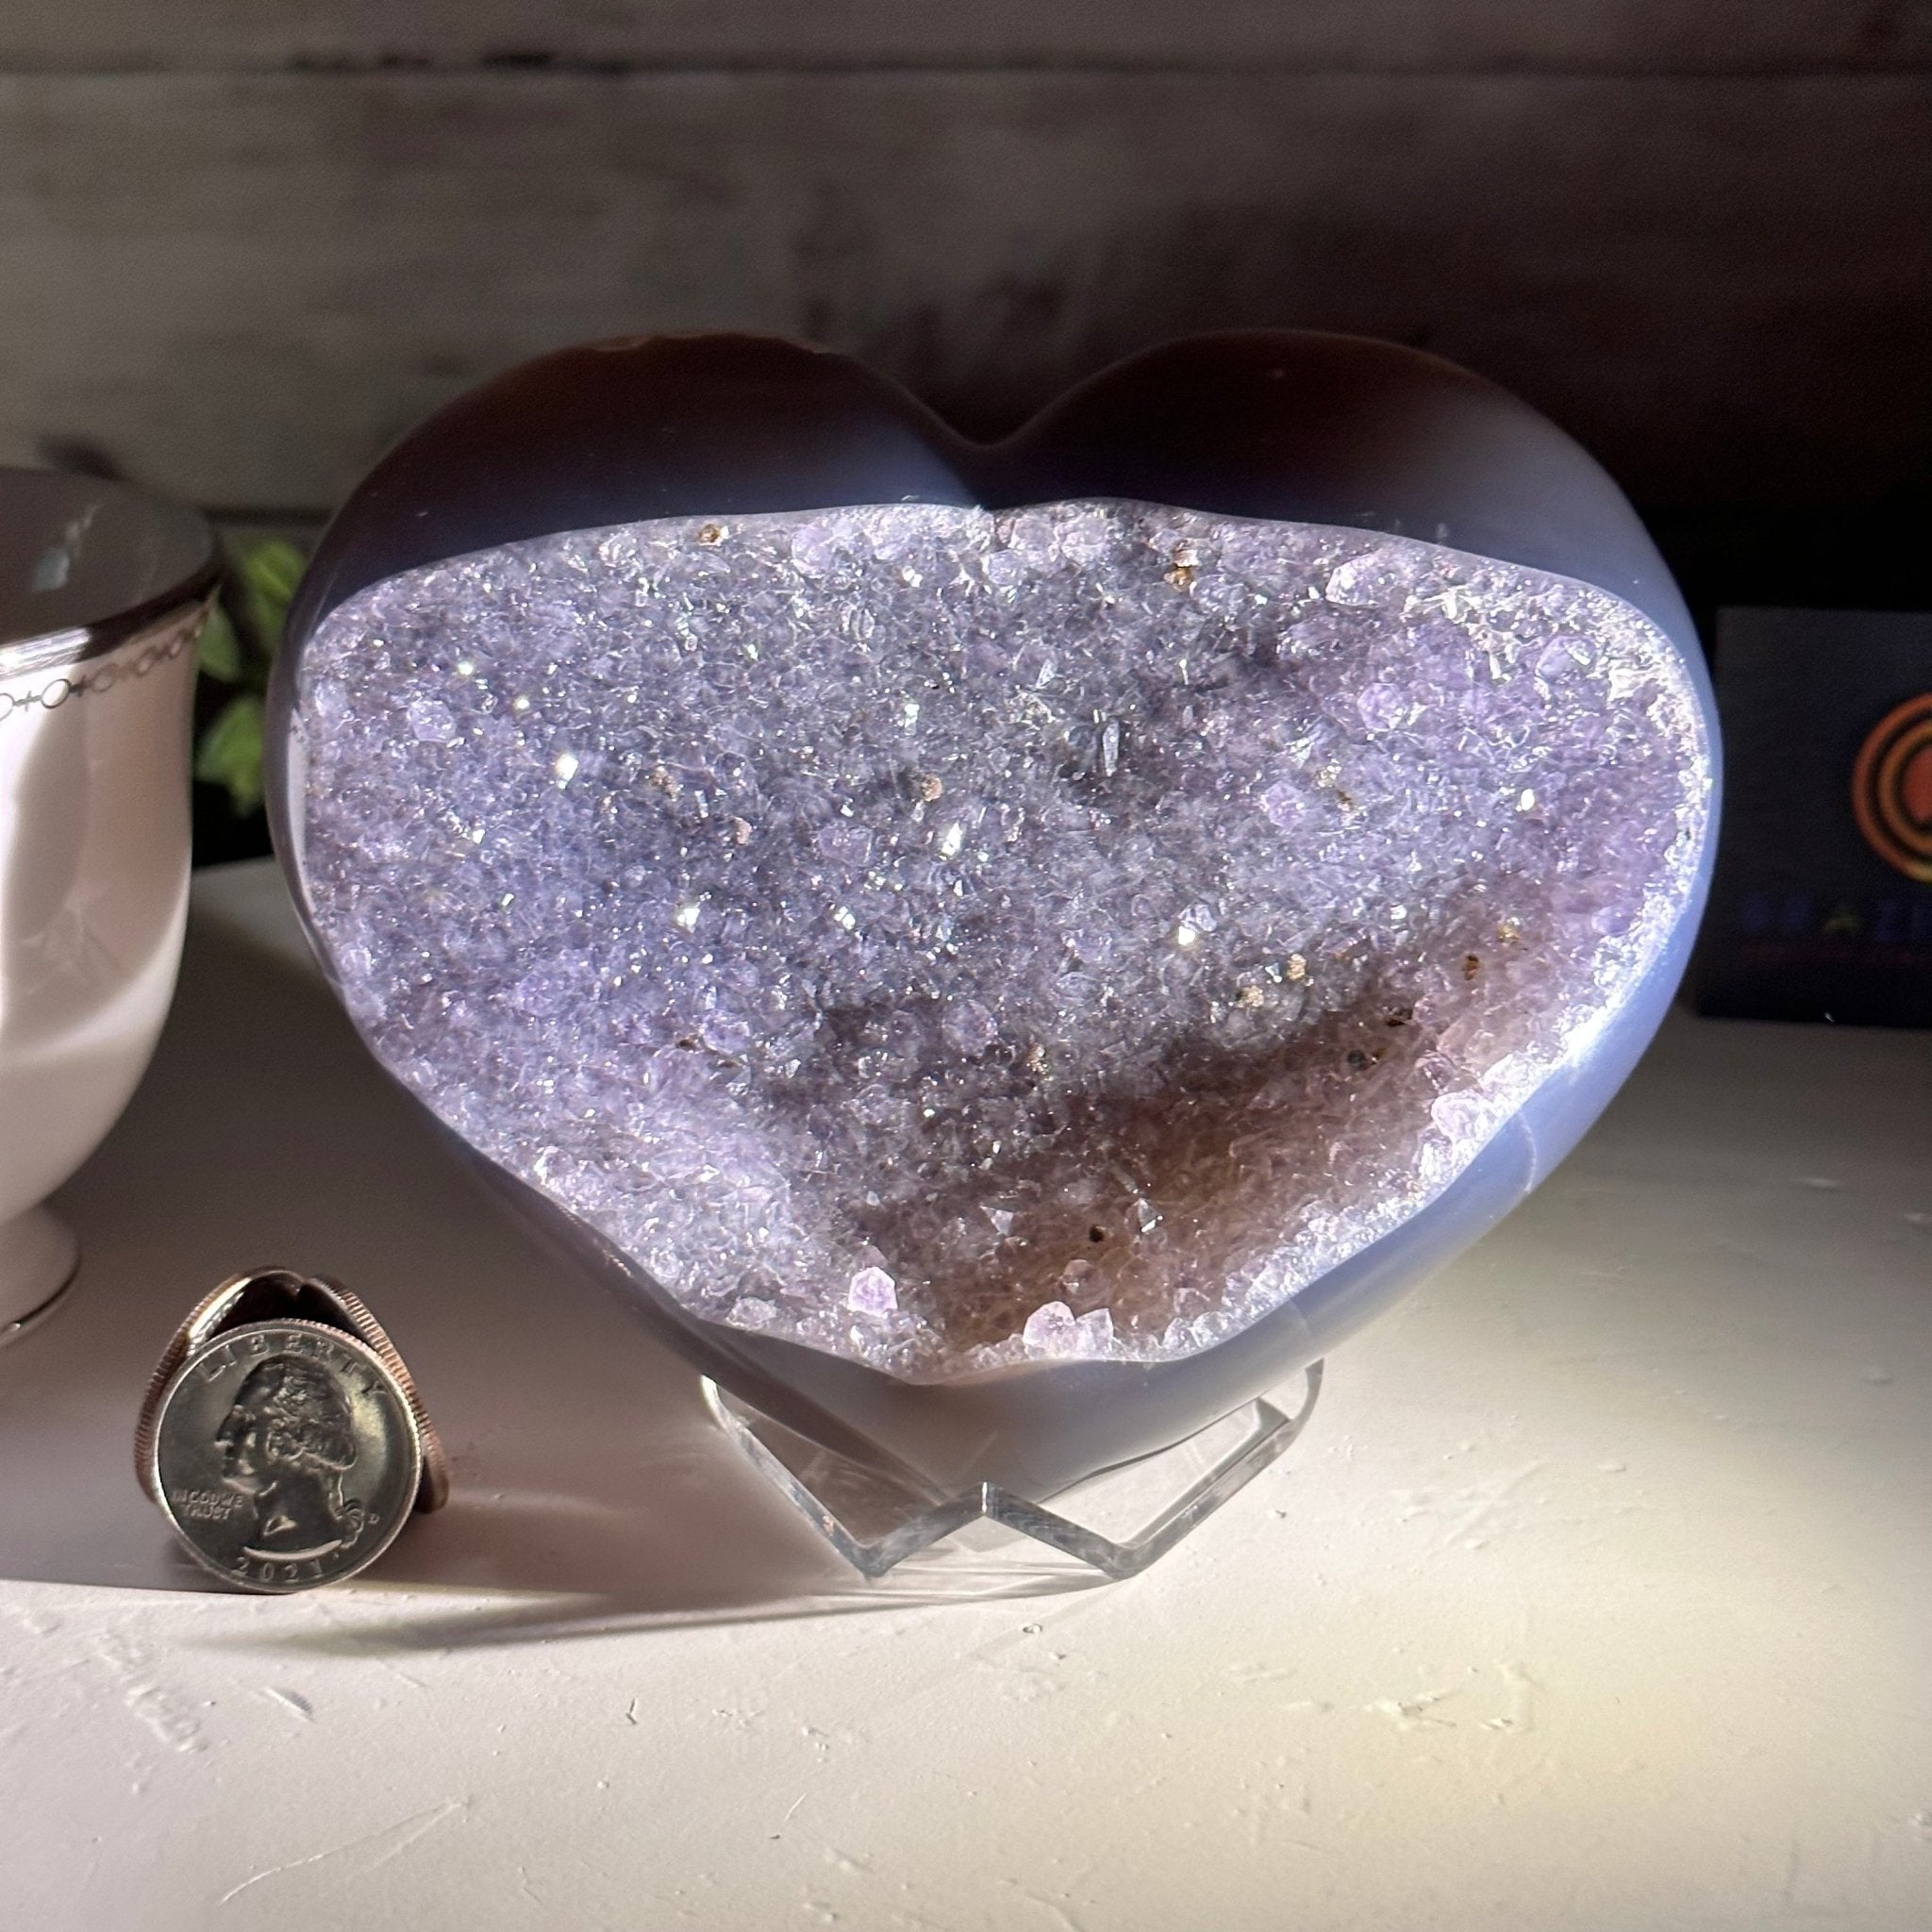 Extra Quality Amethyst Heart Geode on an Acrylic Stand 1.78 lbs & 3.9" Tall #5462-0099 by Brazil Gems - Brazil GemsBrazil GemsExtra Quality Amethyst Heart Geode on an Acrylic Stand 1.78 lbs & 3.9" Tall #5462-0099 by Brazil GemsHearts5462-0099